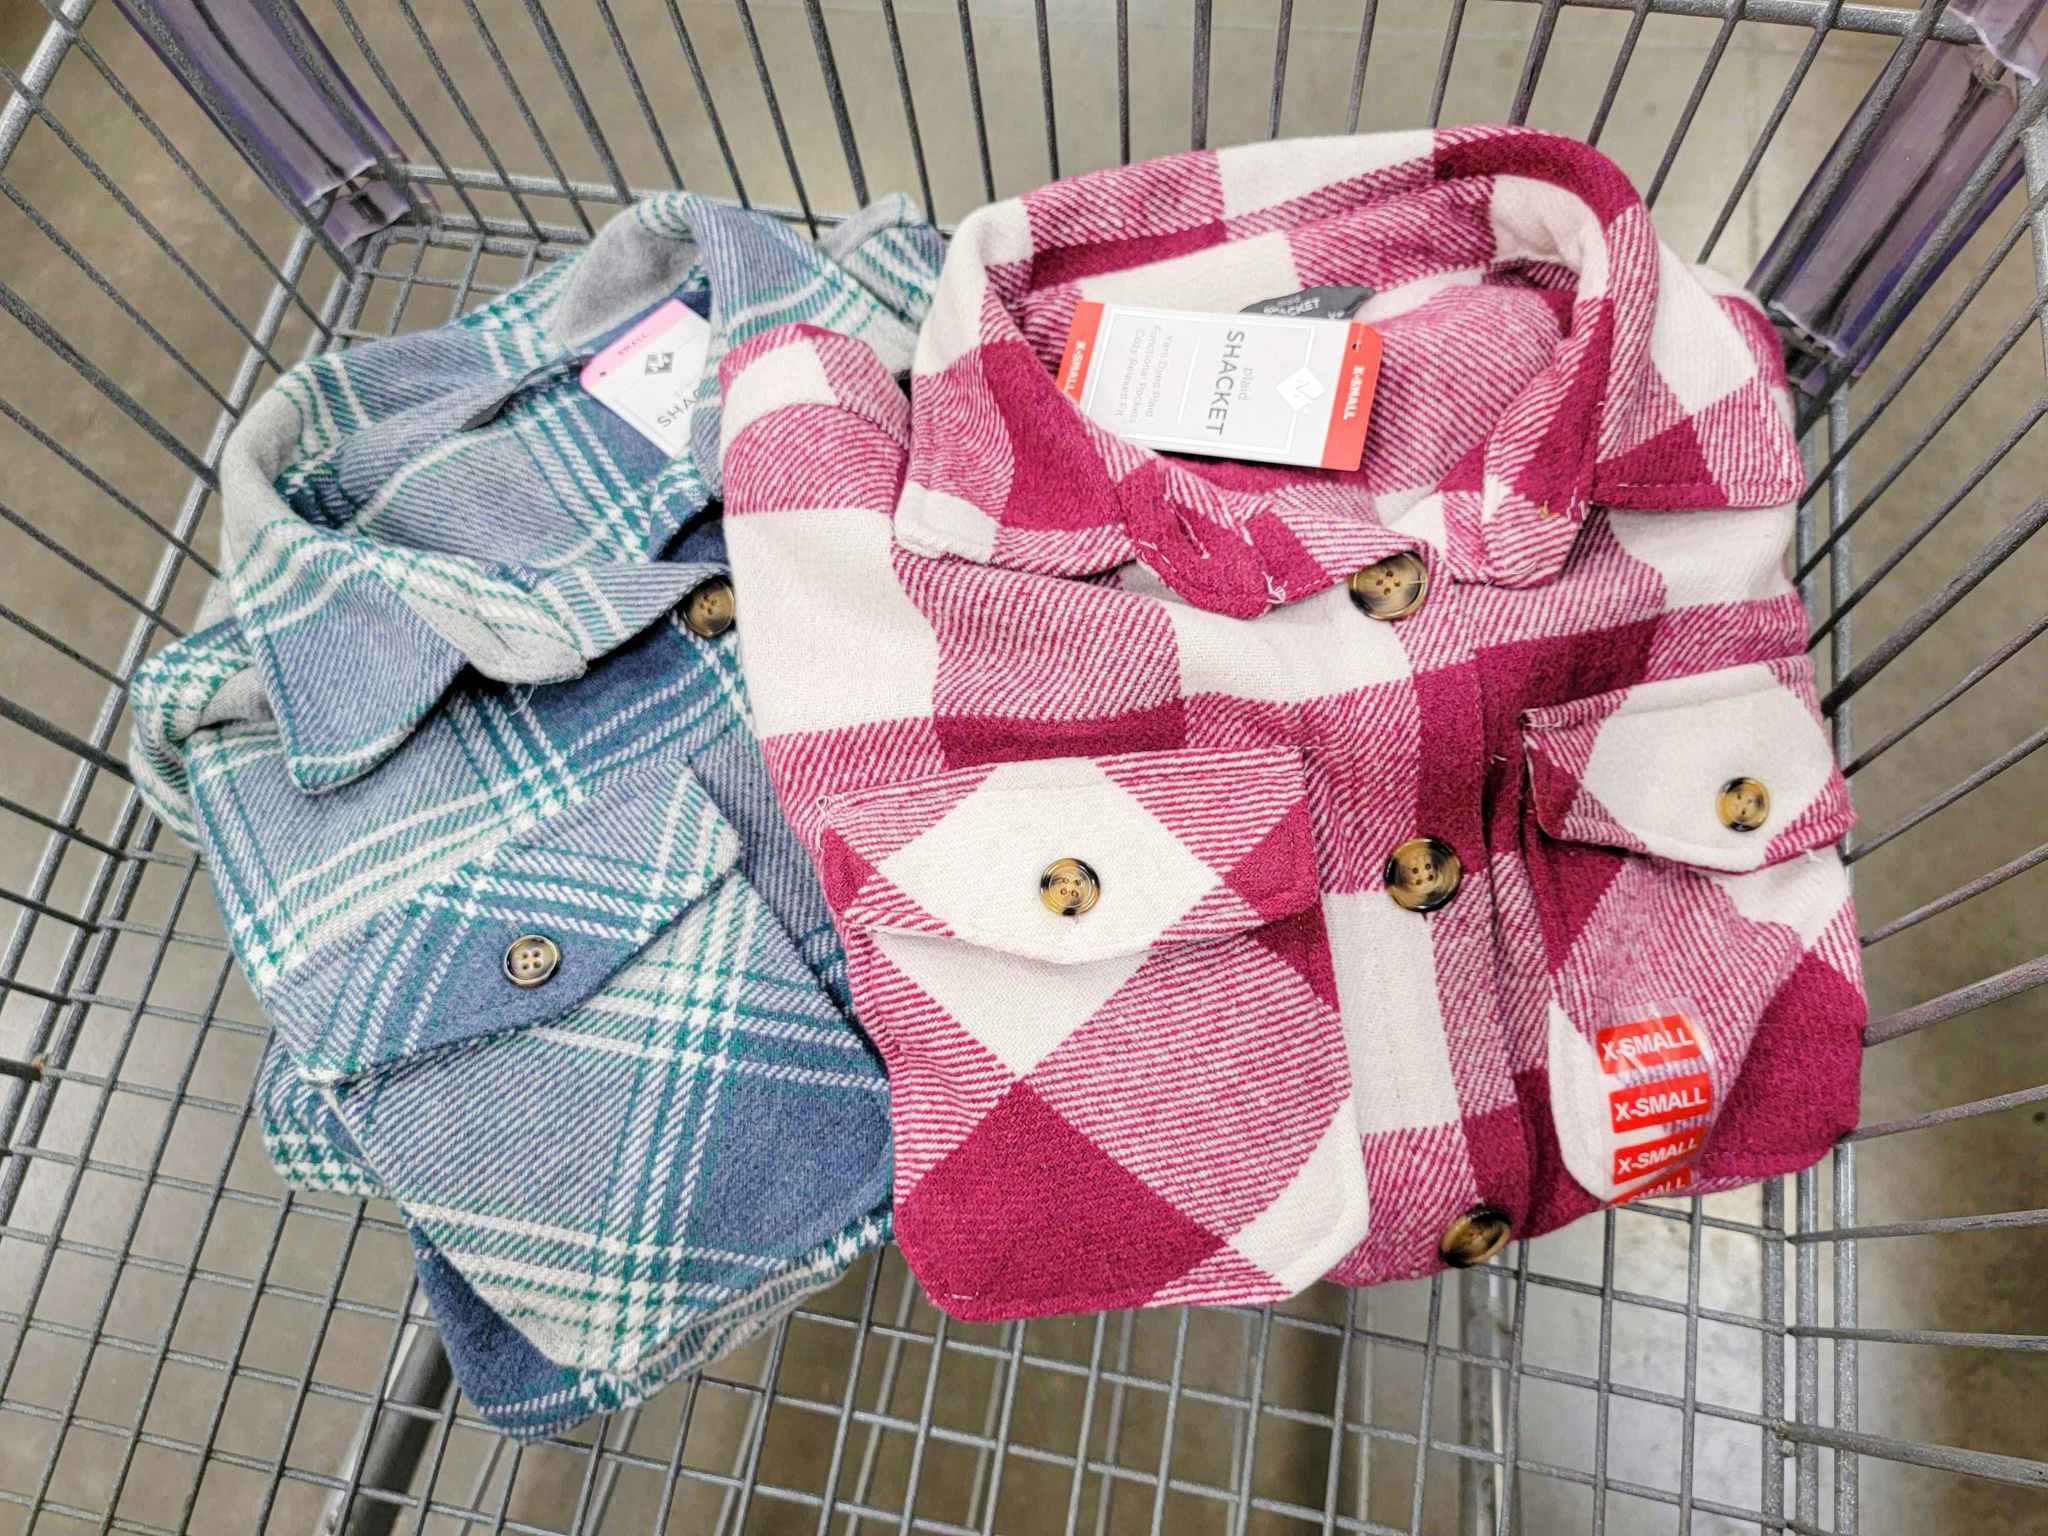 2 ladies shackets in a cart, one is blue plaid one is pink plaid